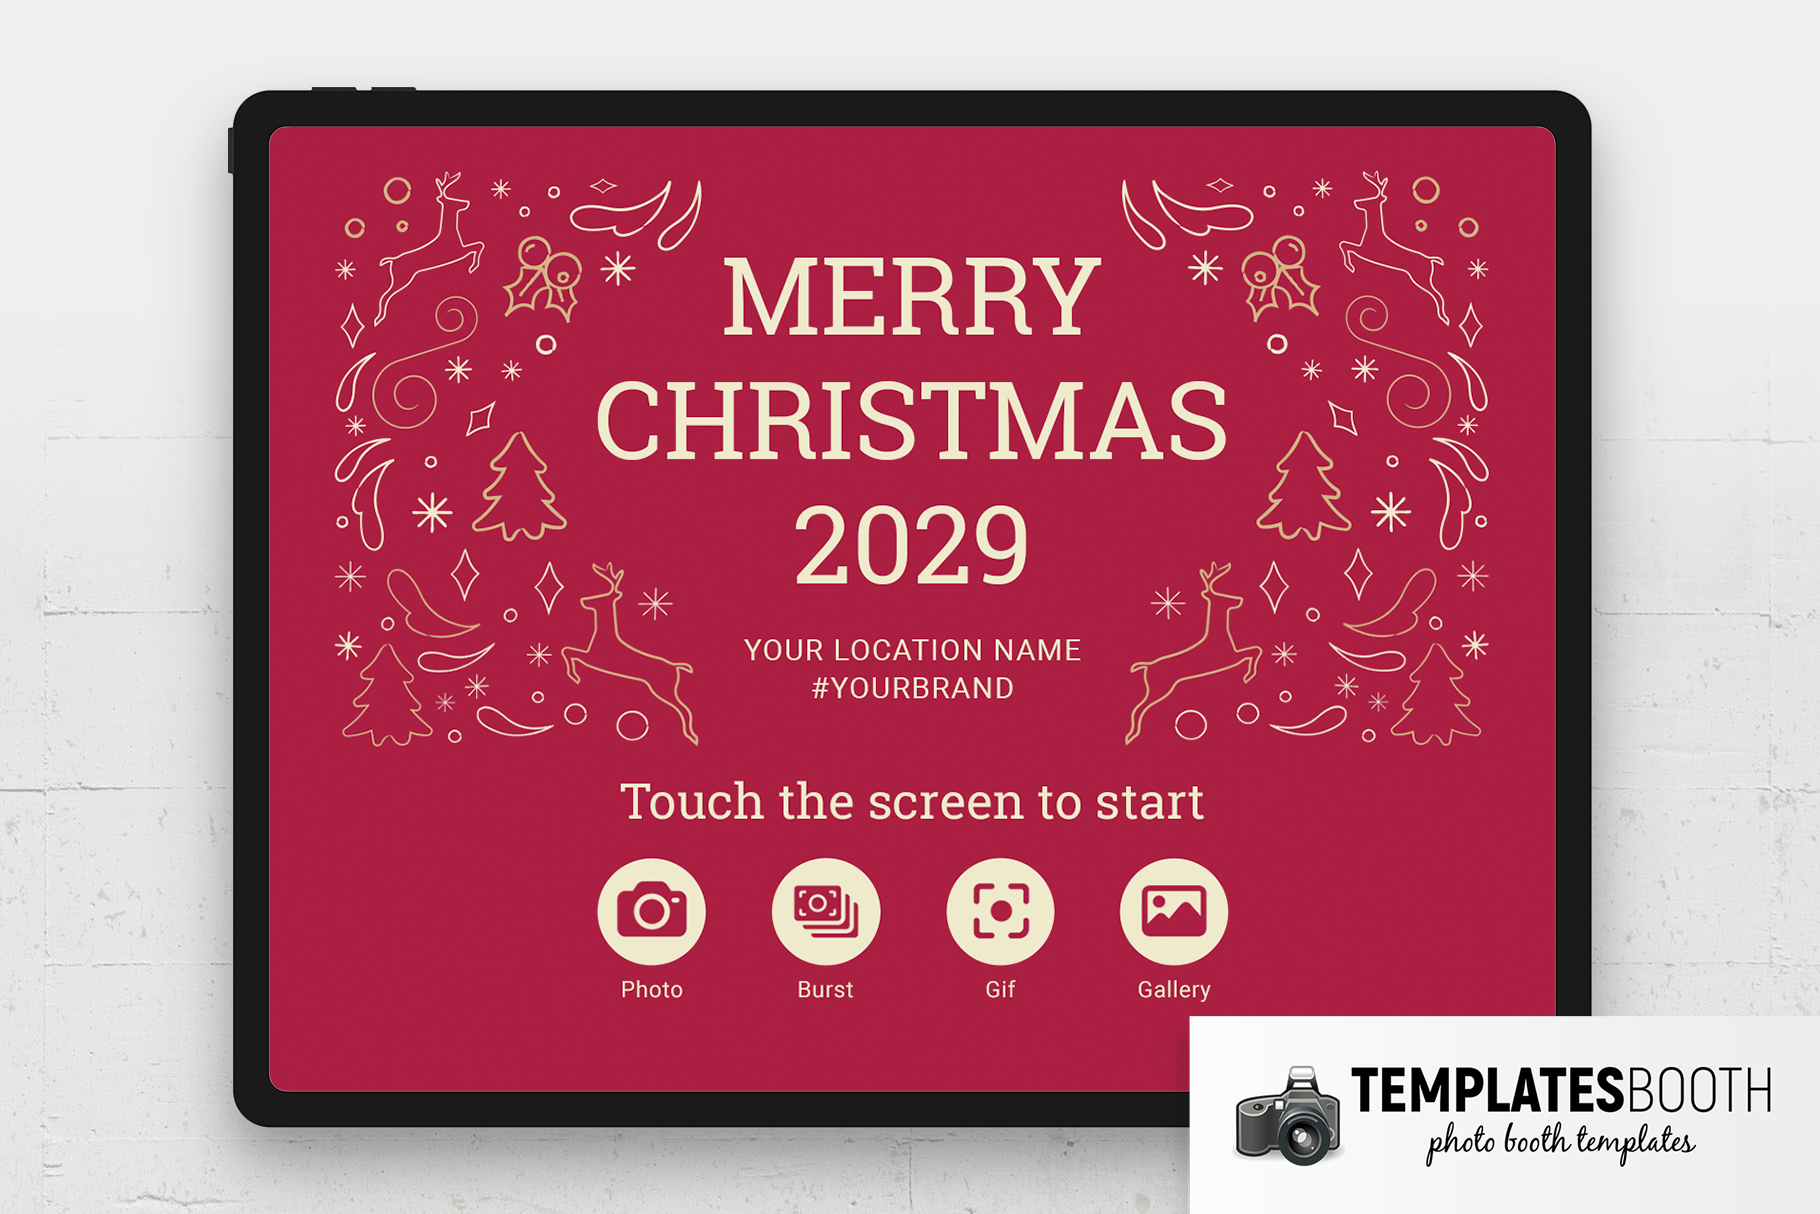 Ornate Christmas Photo Booth Welcome Screen